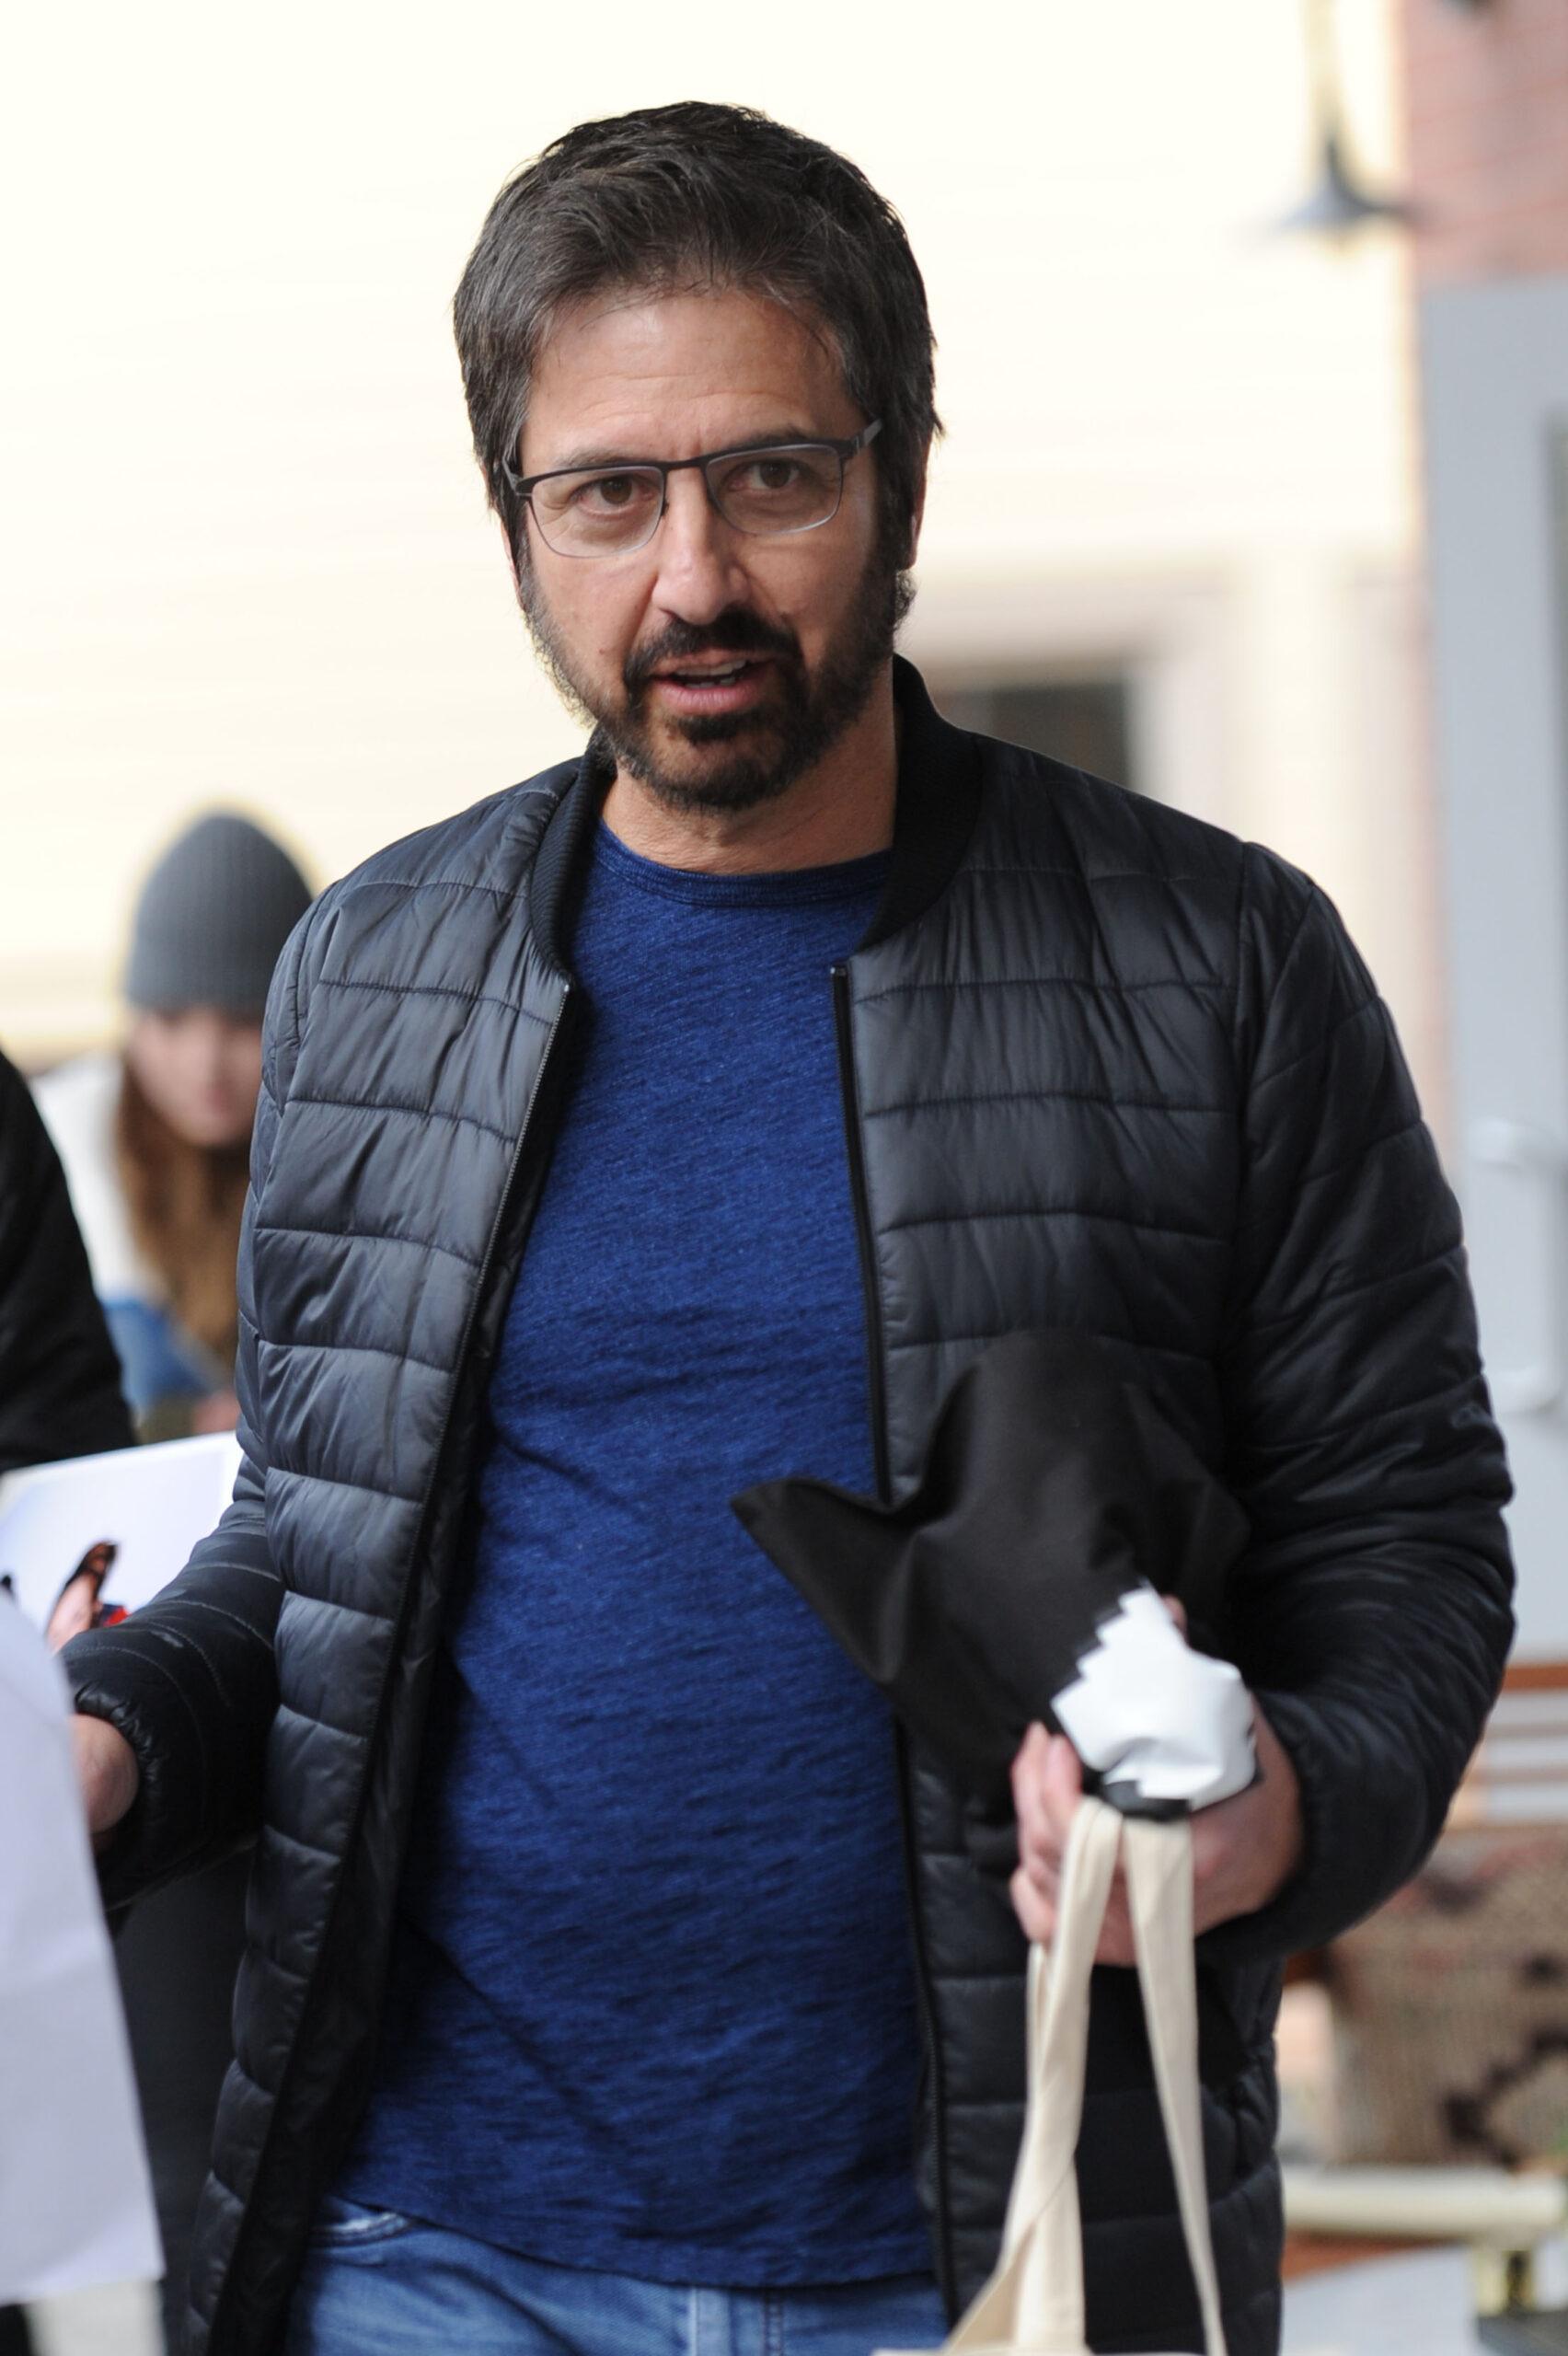 Ray Romano takes in the sights at the Sundance Film Festival in Park City